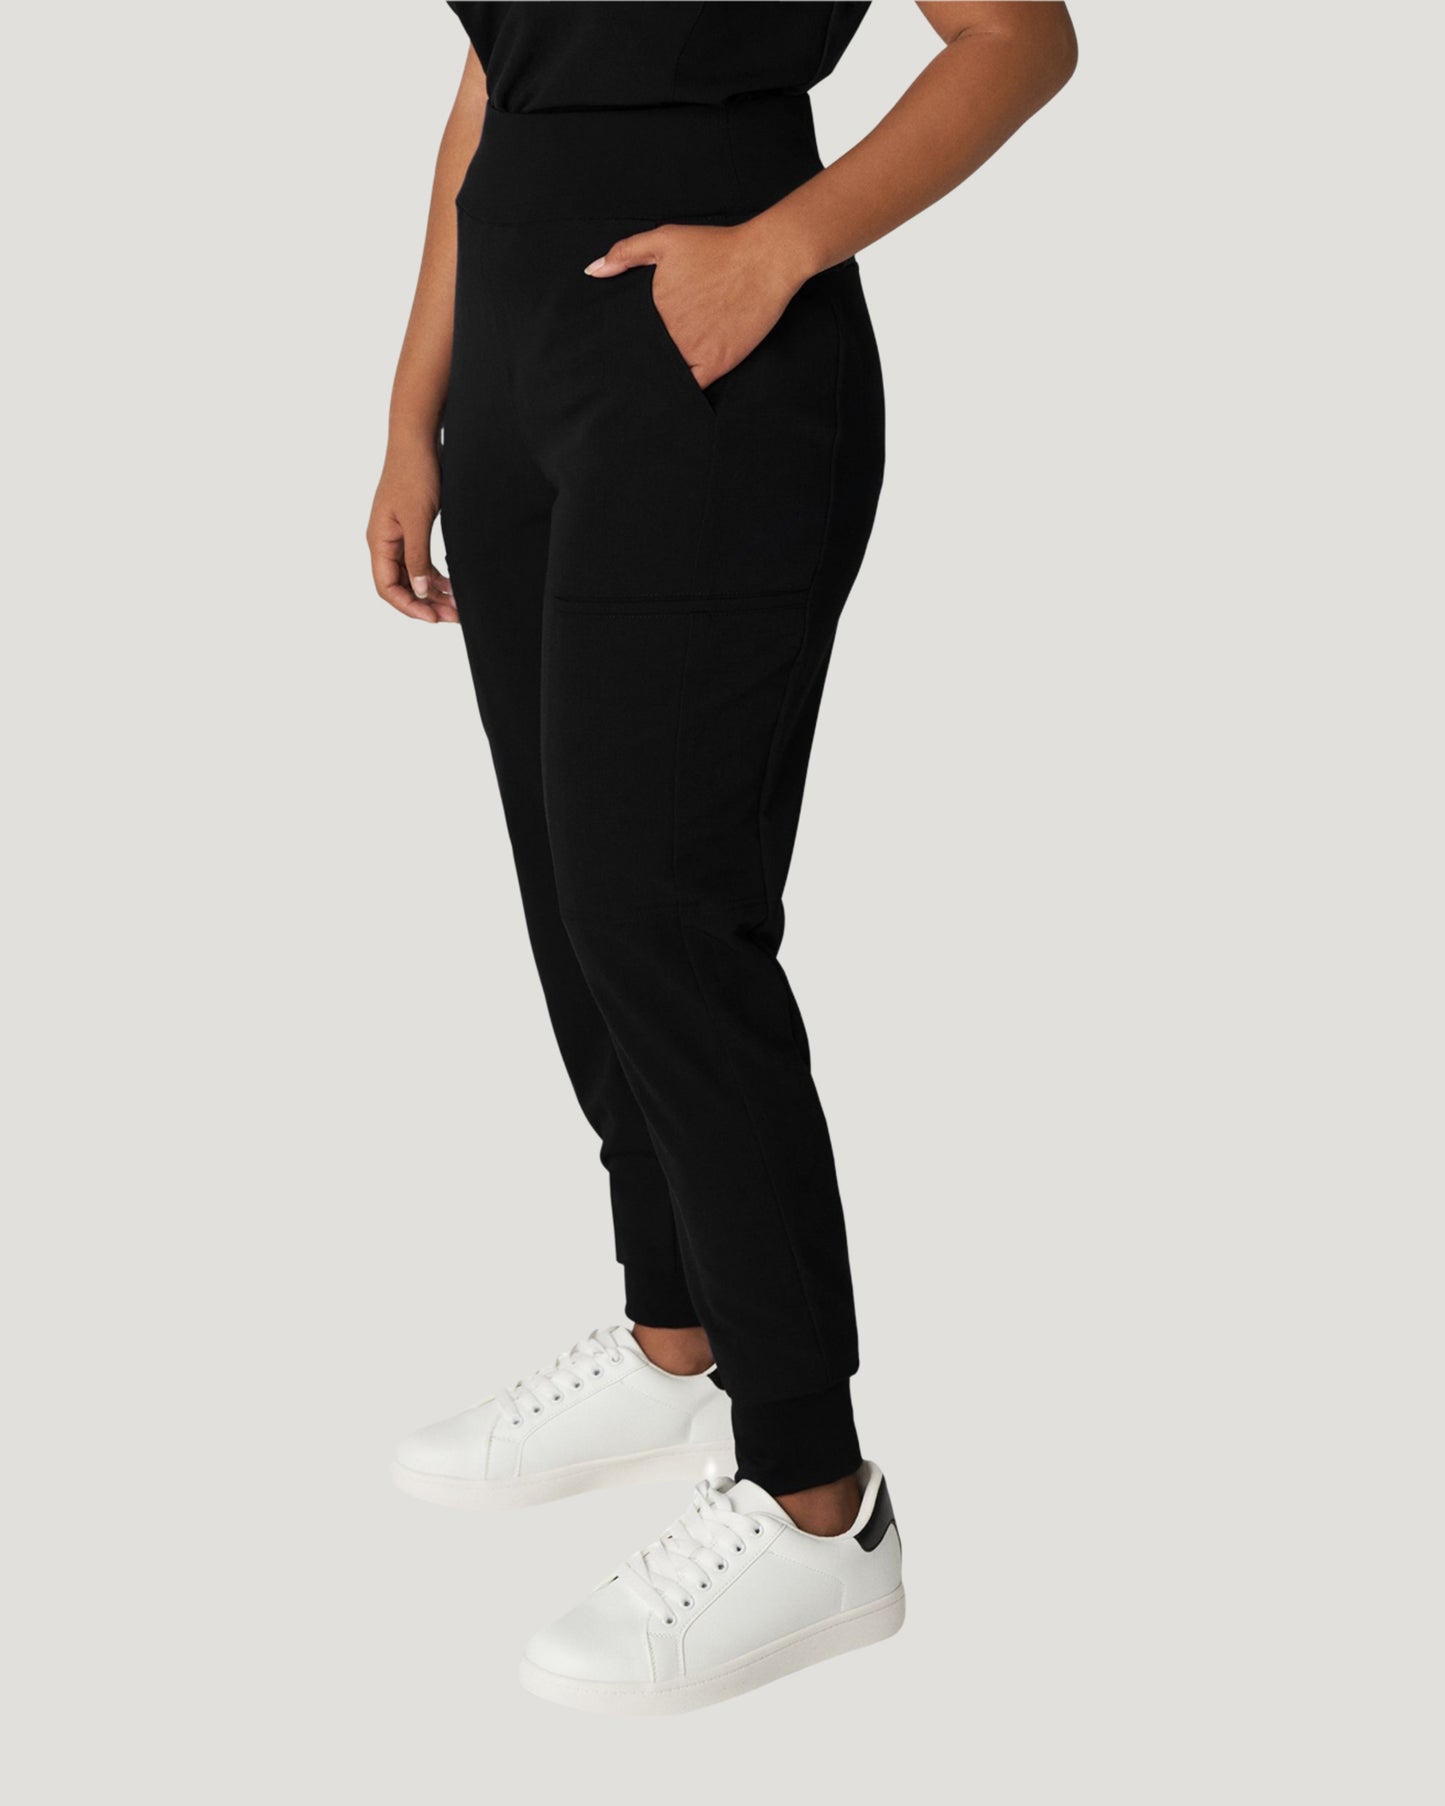 White Cross V-Tess WB410 Jogger Pants with Jersey Knit Contrast 6 Pockets